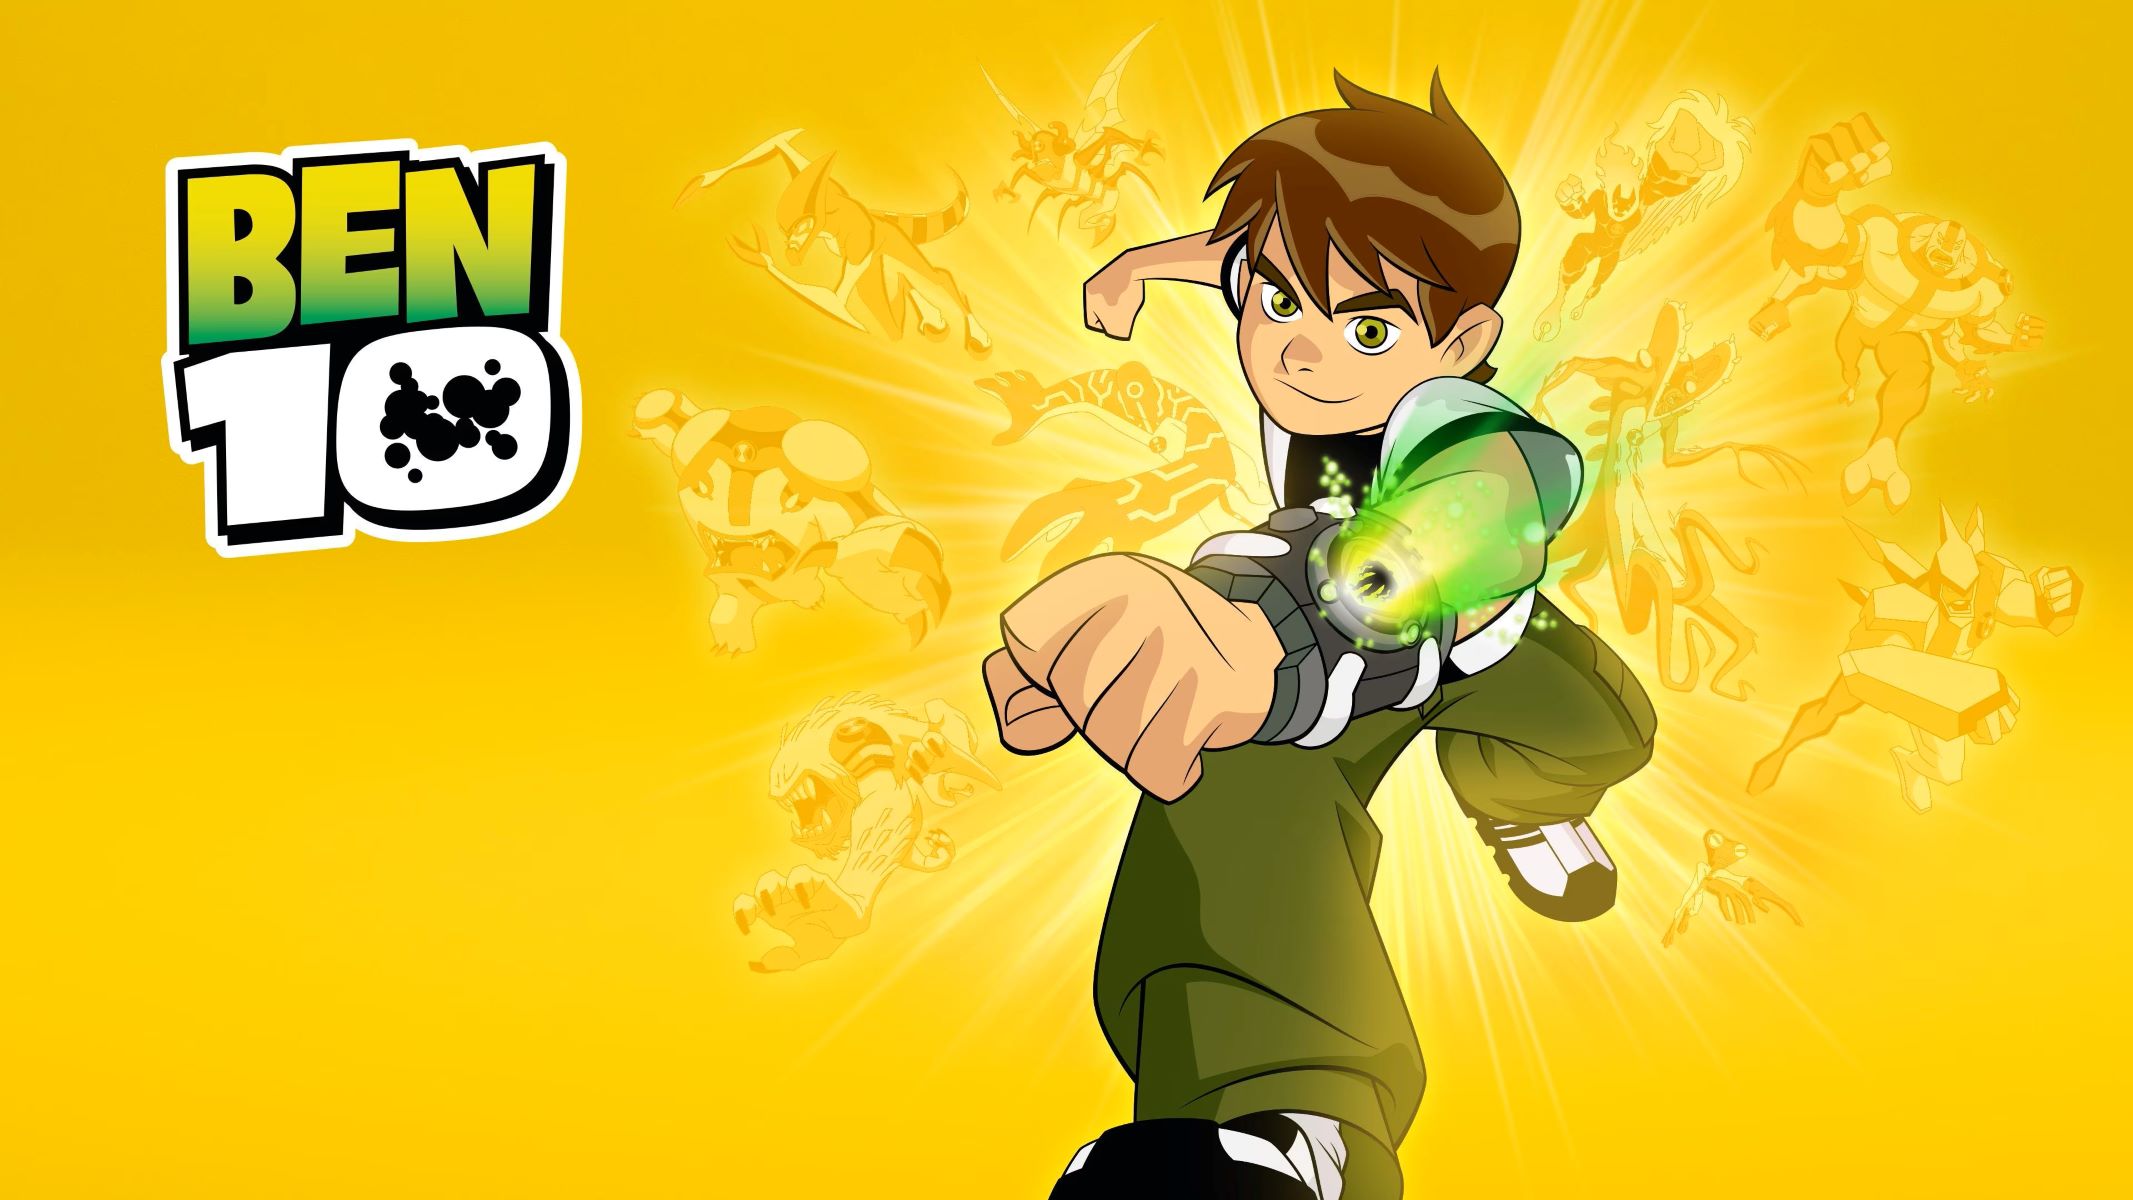 The Ultimate Guide To Watching Ben 10: The Perfect Order For Maximum Adventure!